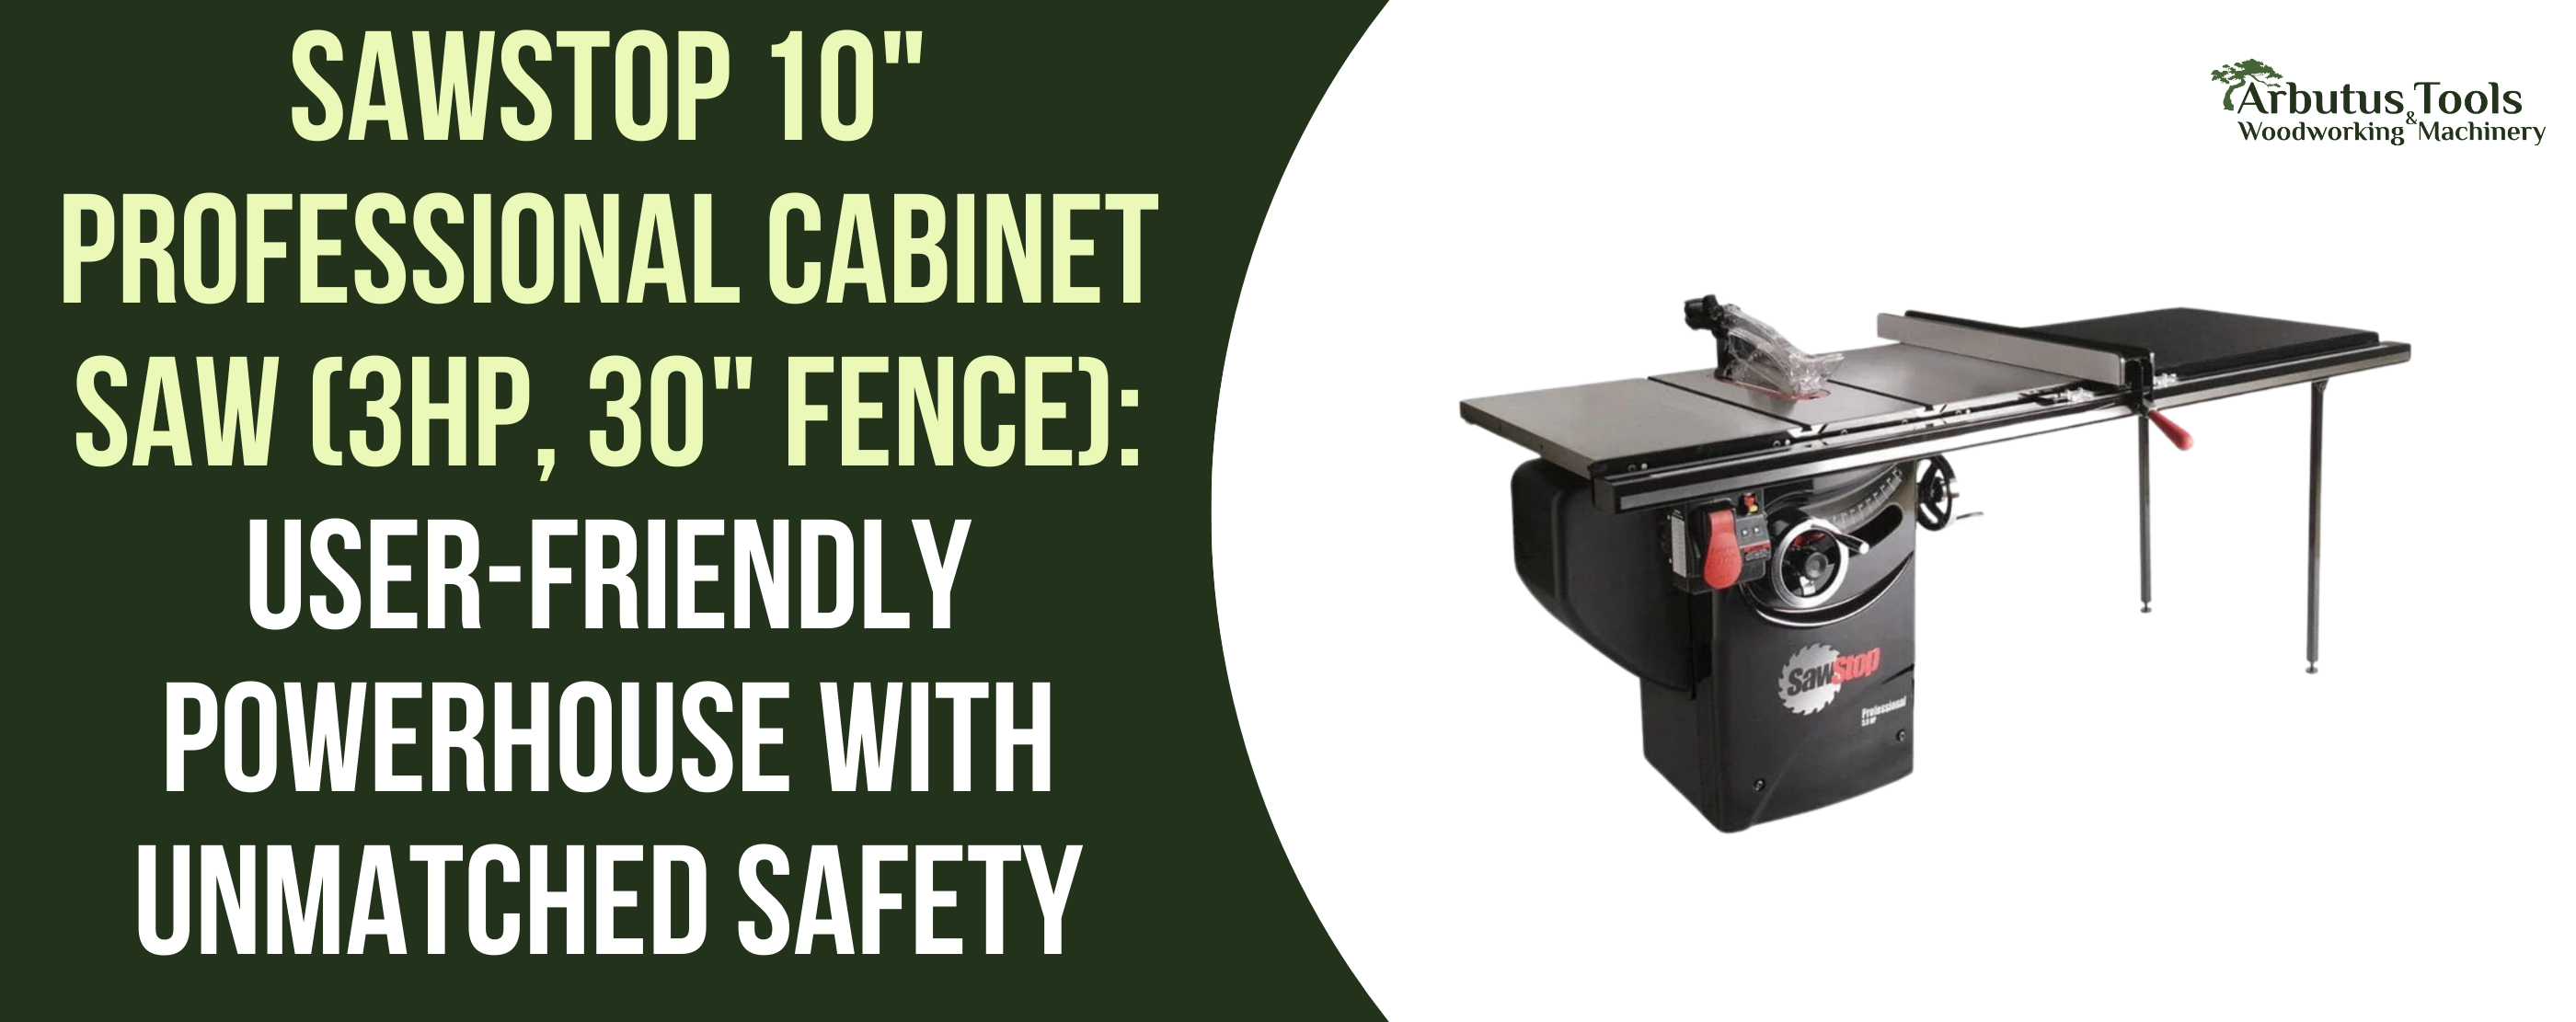 SawStop 10" Professional Cabinet Saw (3HP, 30" Fence): User-Friendly Powerhouse with Unmatched Safety